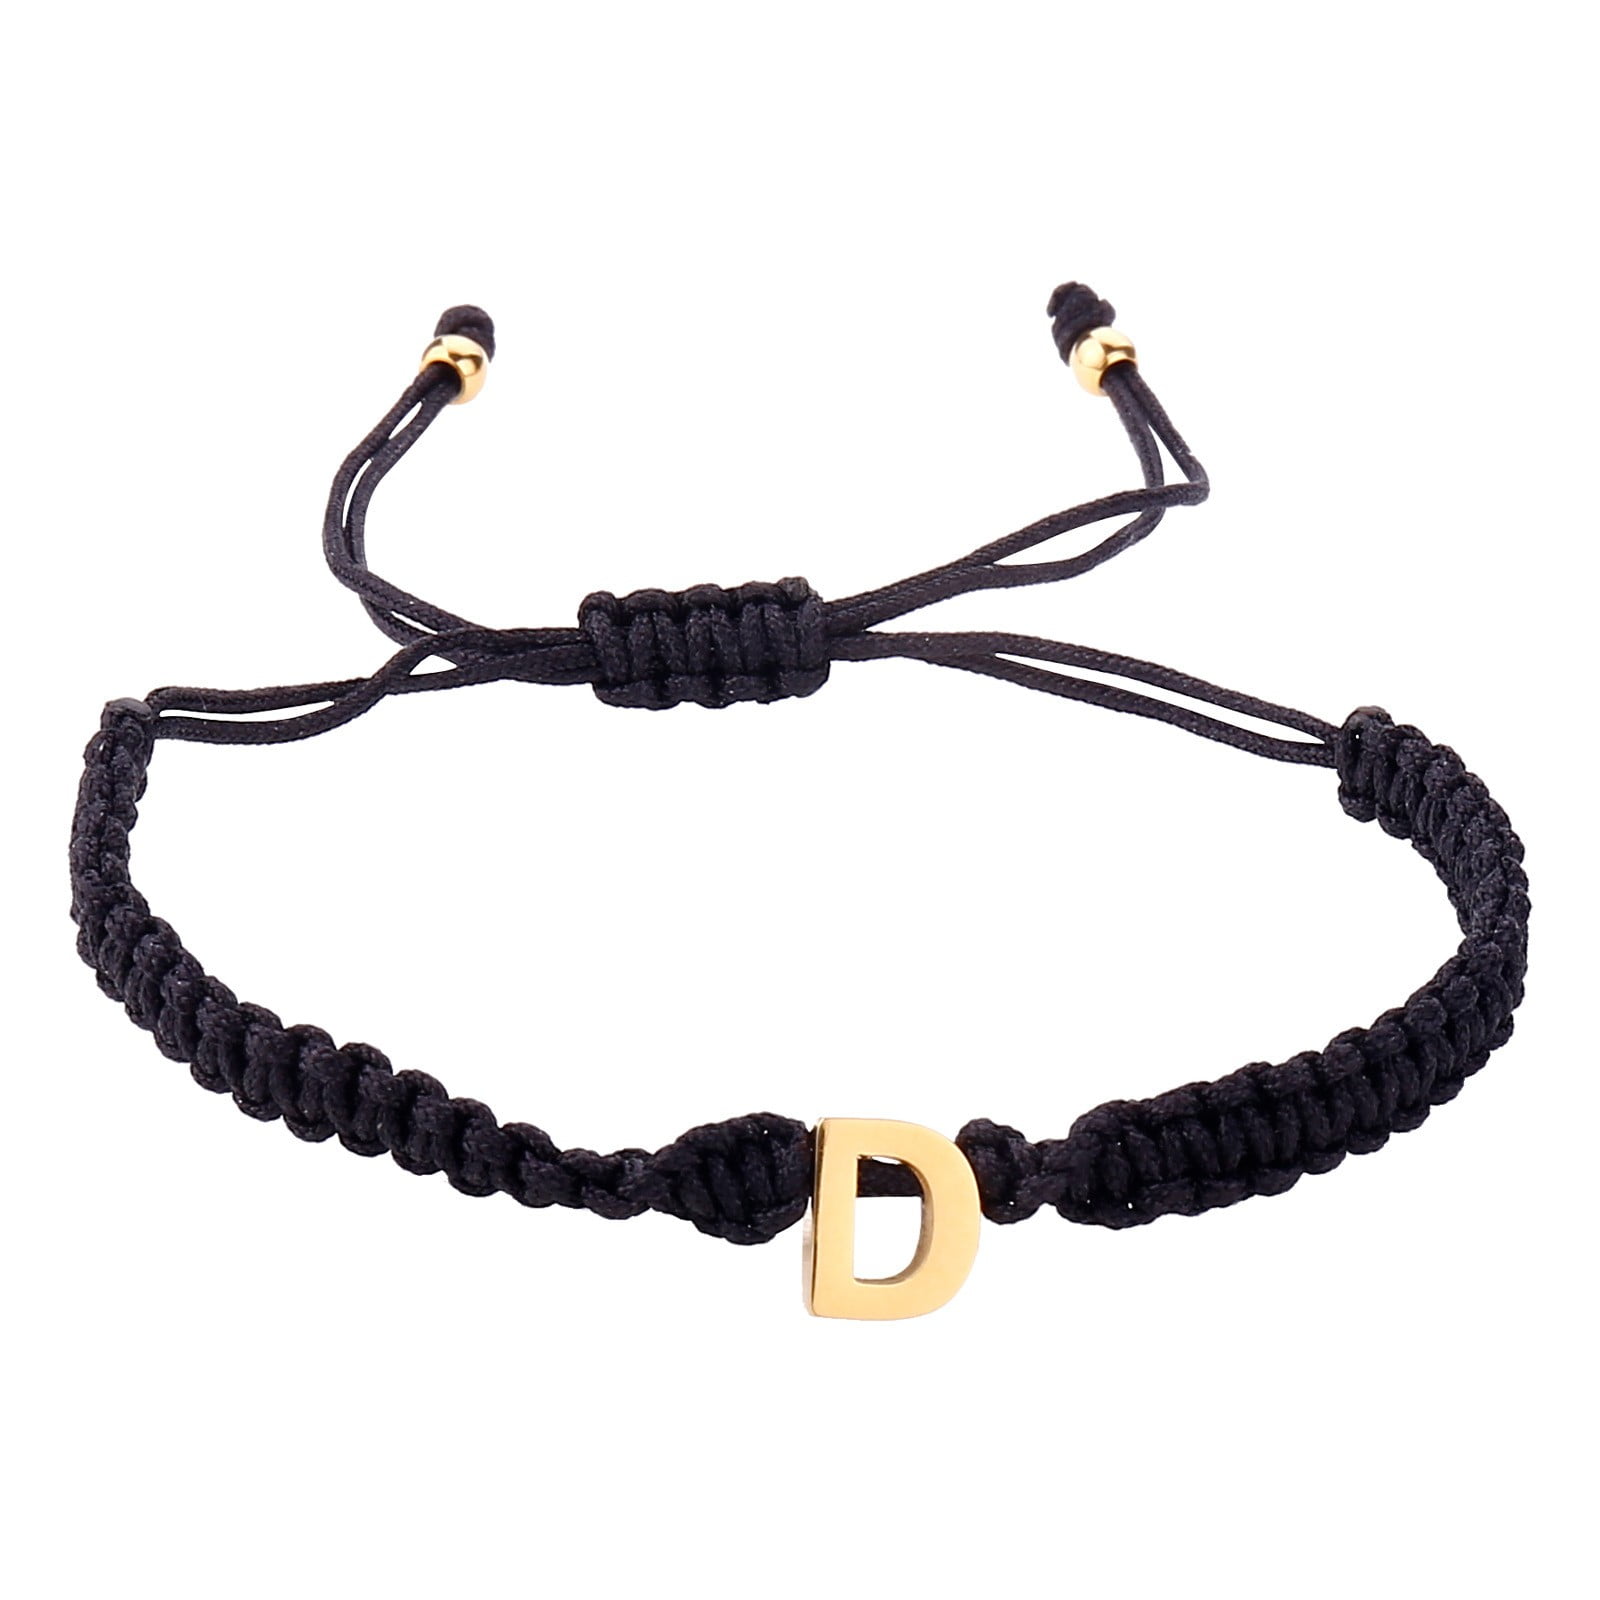 Personalized 26 Initial Bracelet Gold Plated Letter Black Woven Bracelet  Charm Bracelet Woven Bracelet For Men Women Girls Jr1487 Teen Watches for